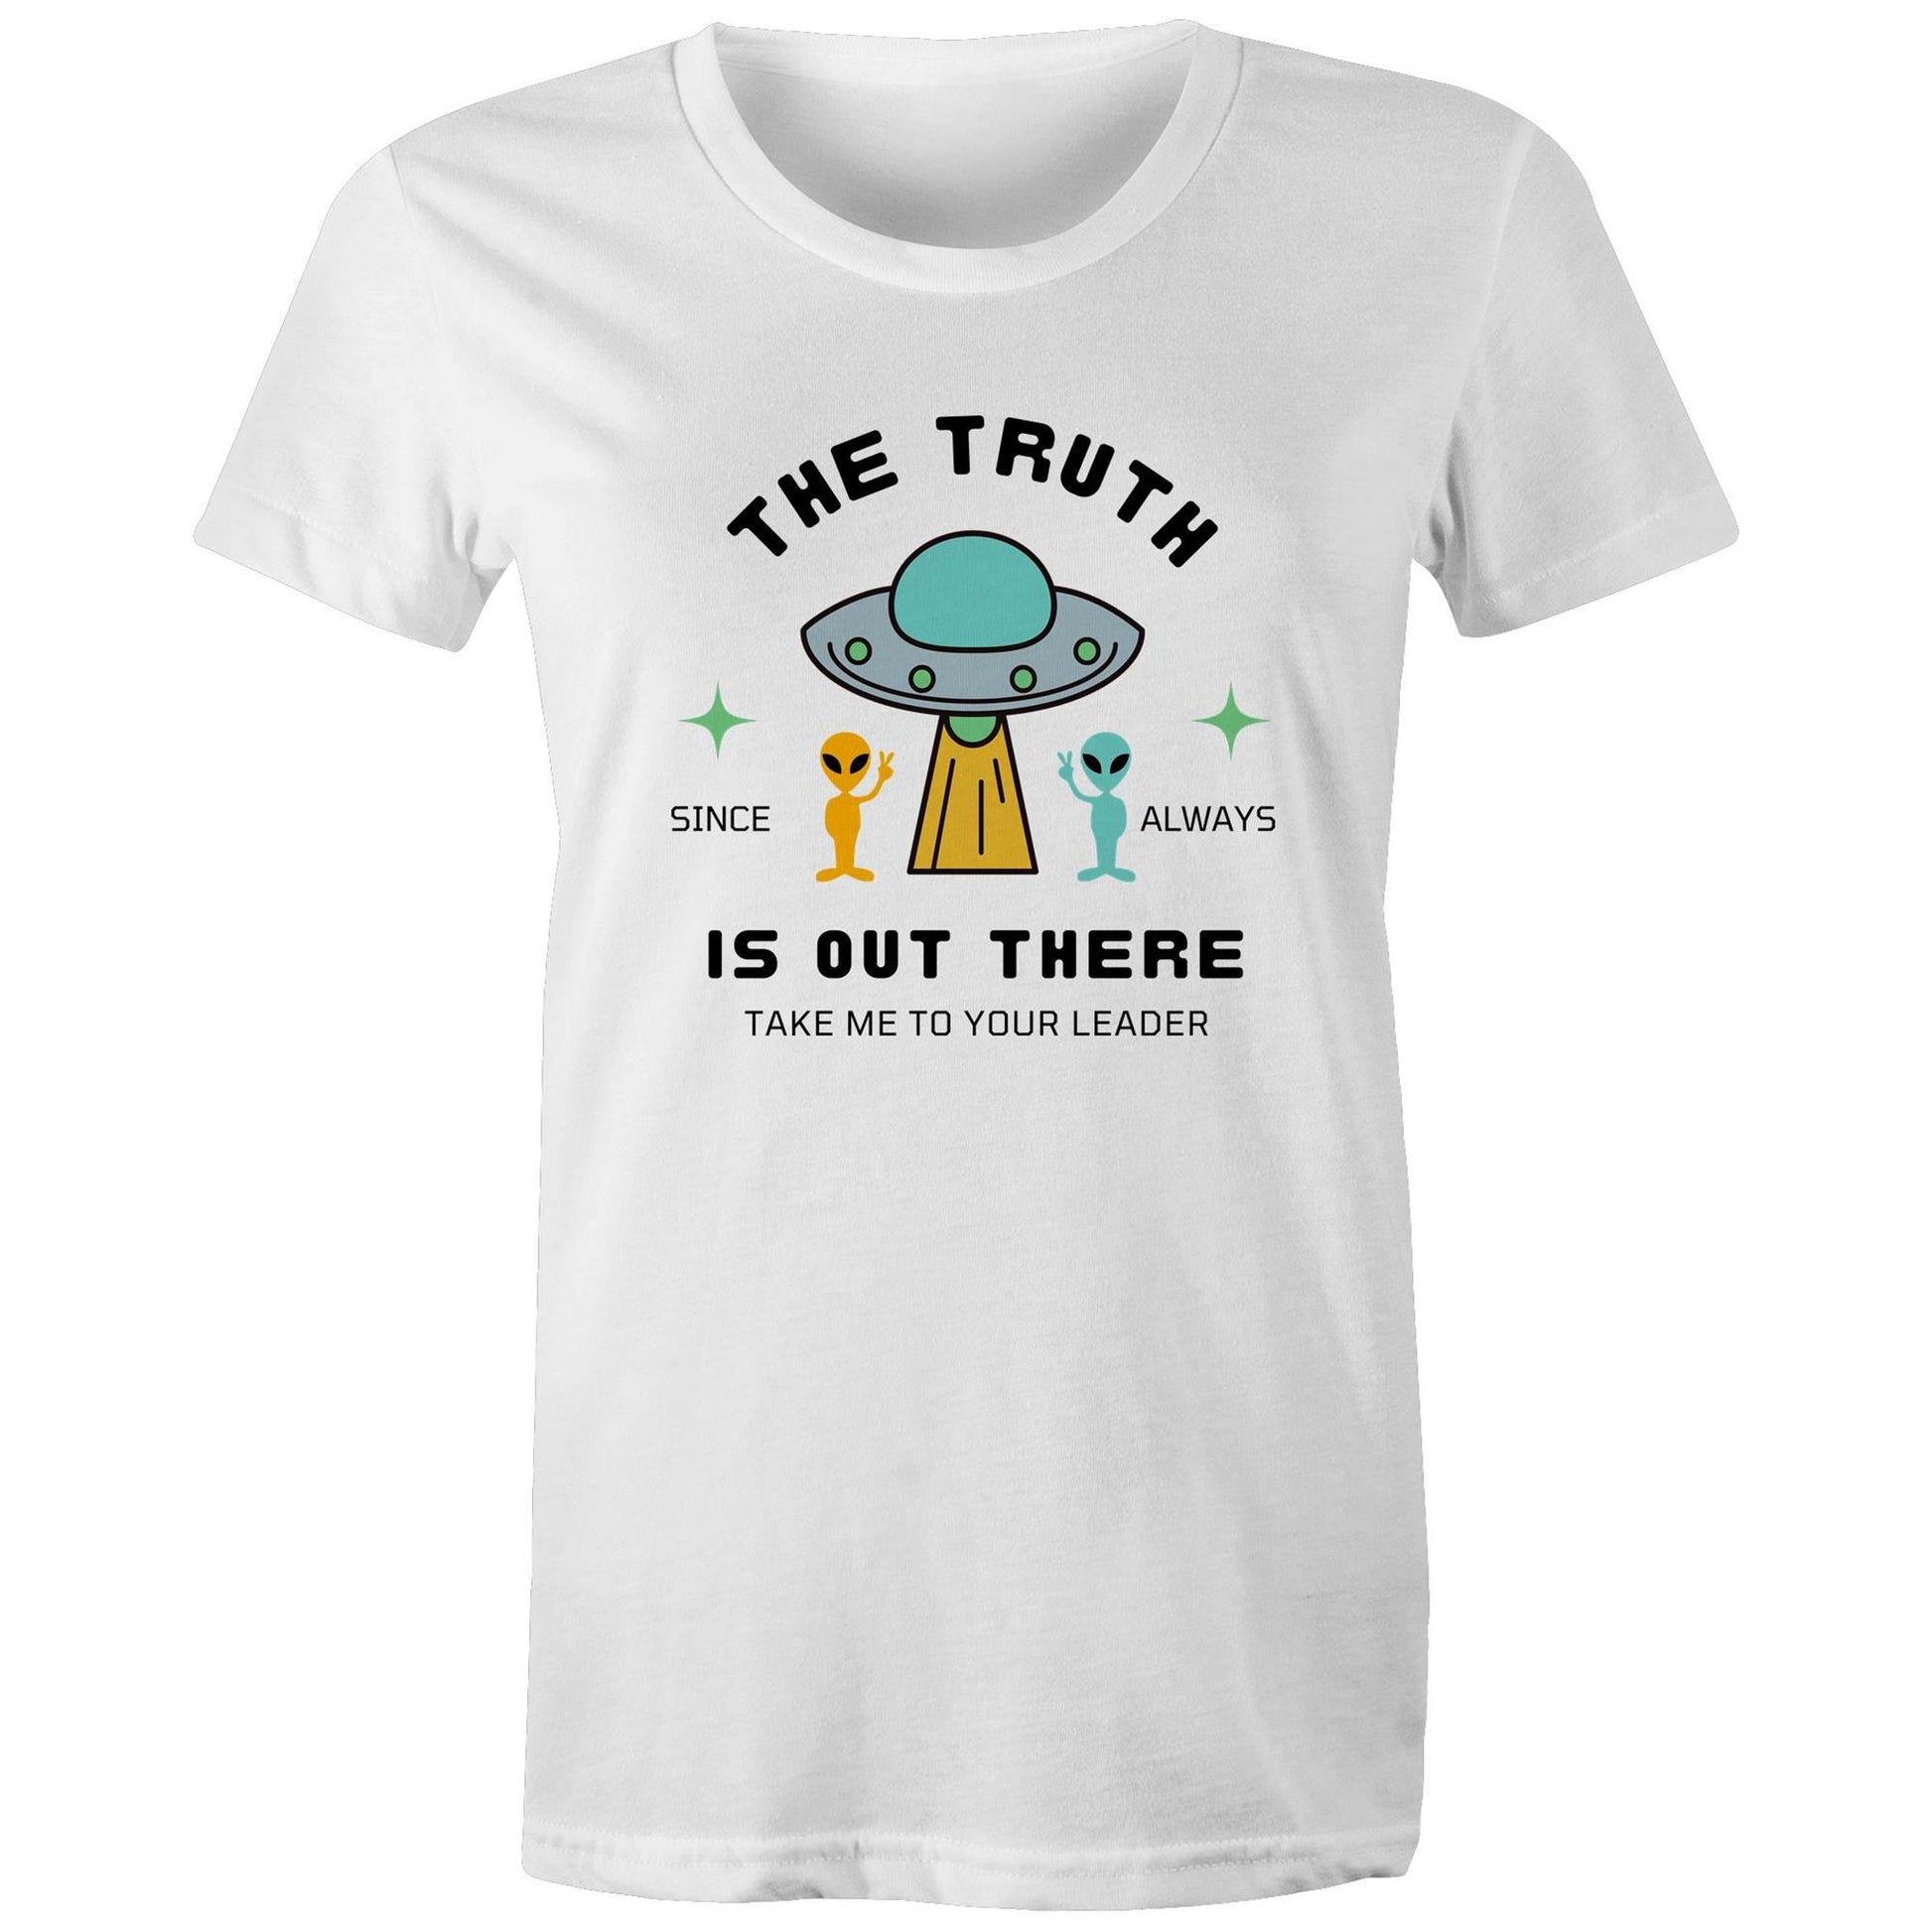 The Truth Is Out There - Womens T-shirt White Womens T-shirt Sci Fi